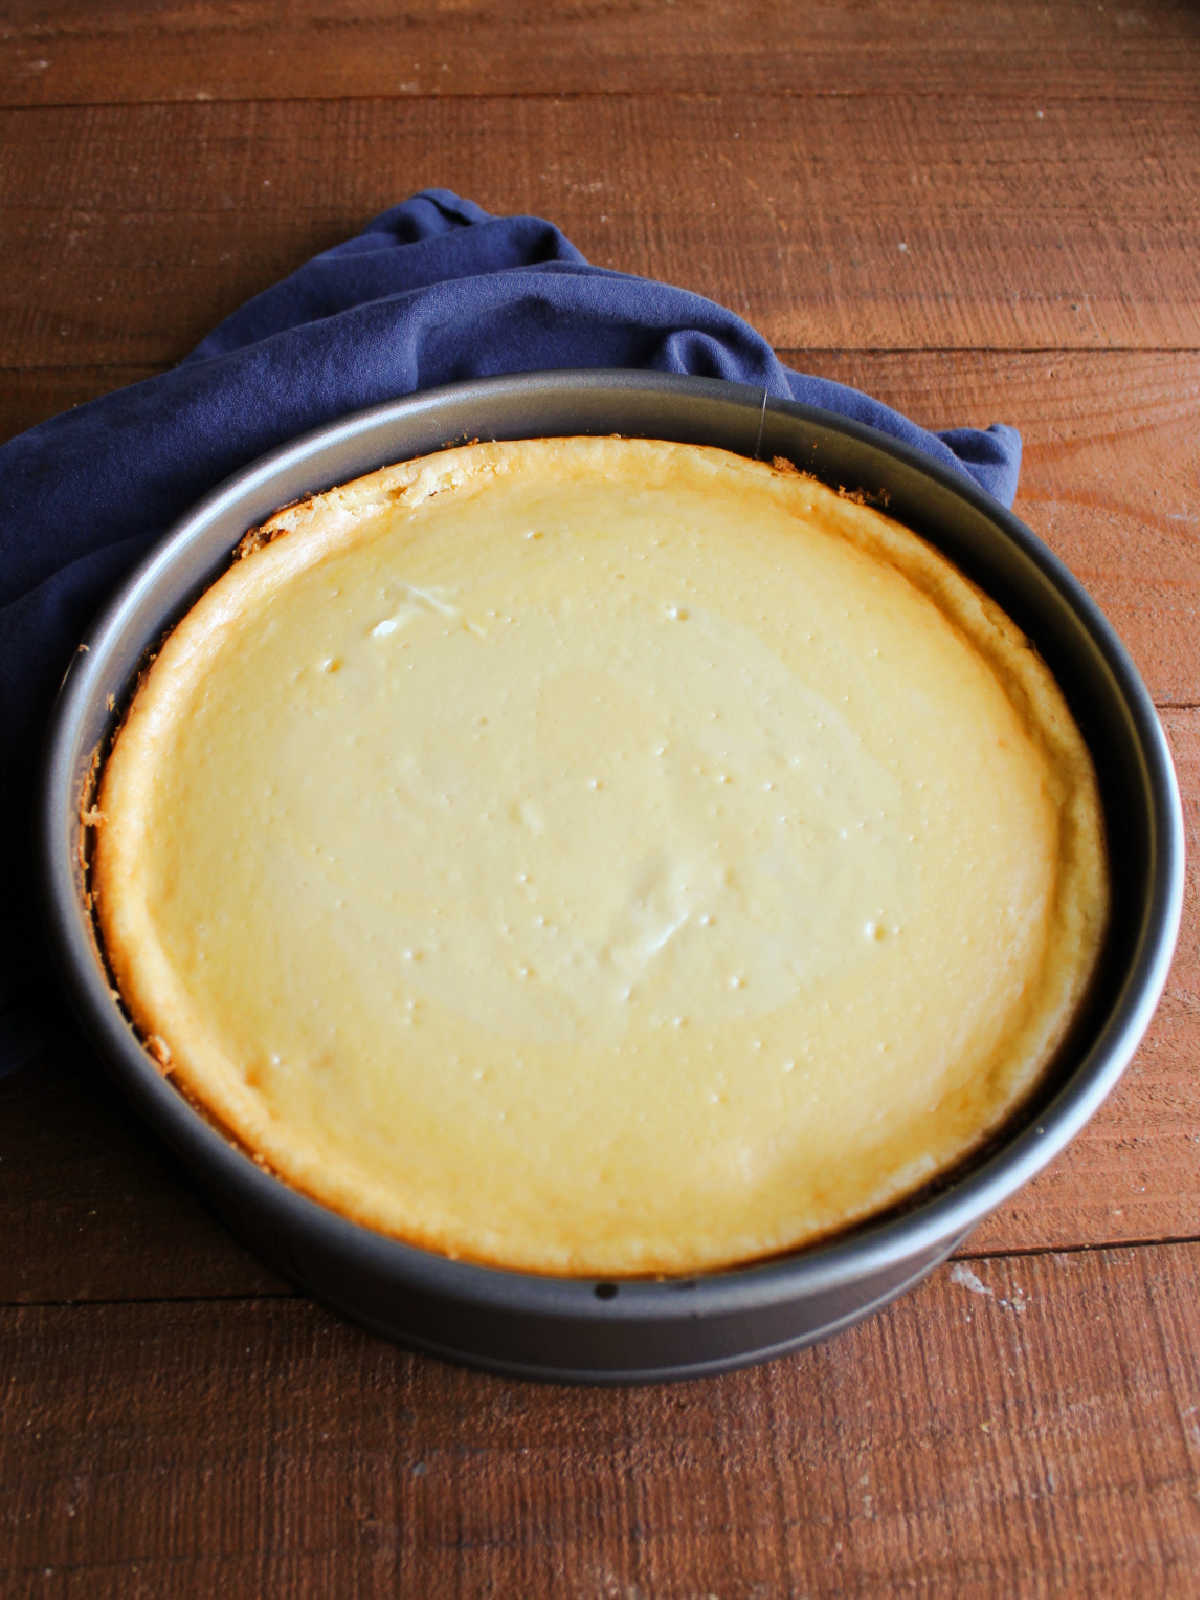 Baked cheesecake that has cooled slightly showing no crack and smooth finish.